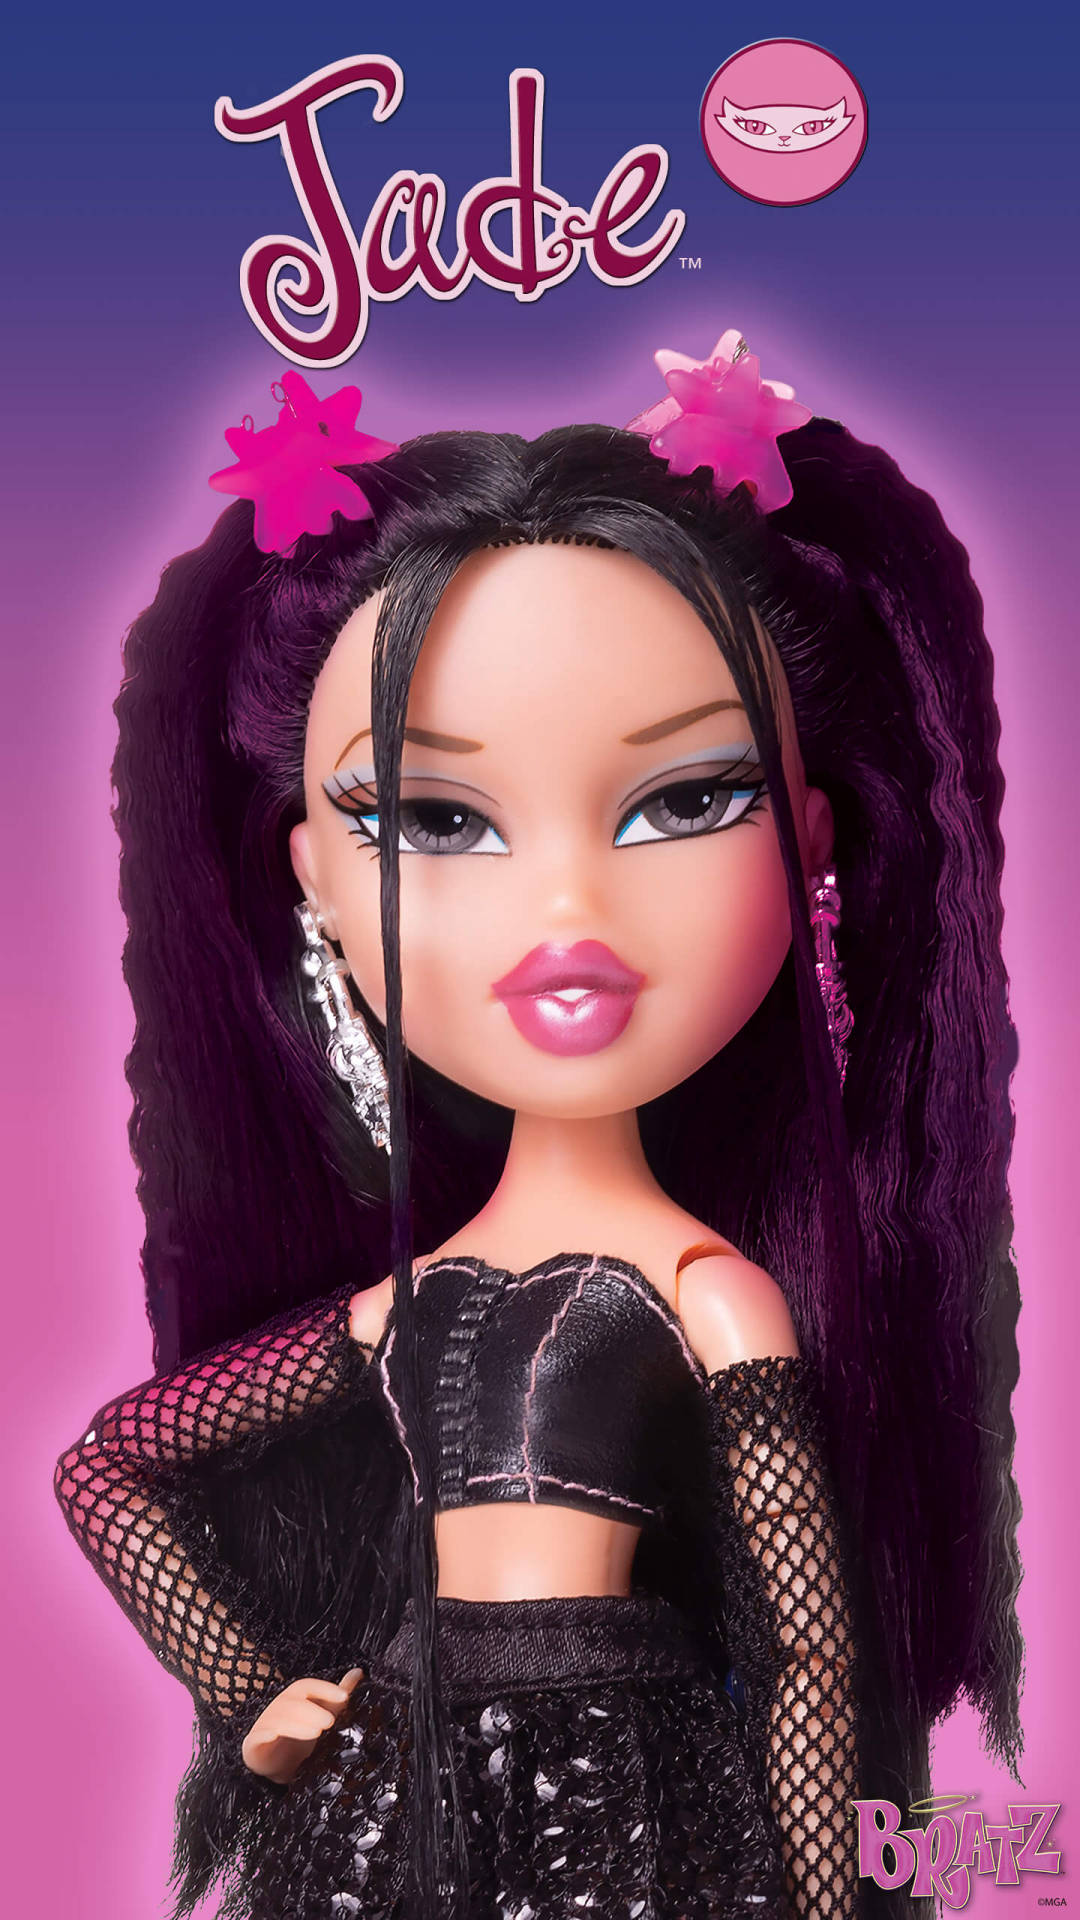 A doll with purple hair and black clothing - Bratz